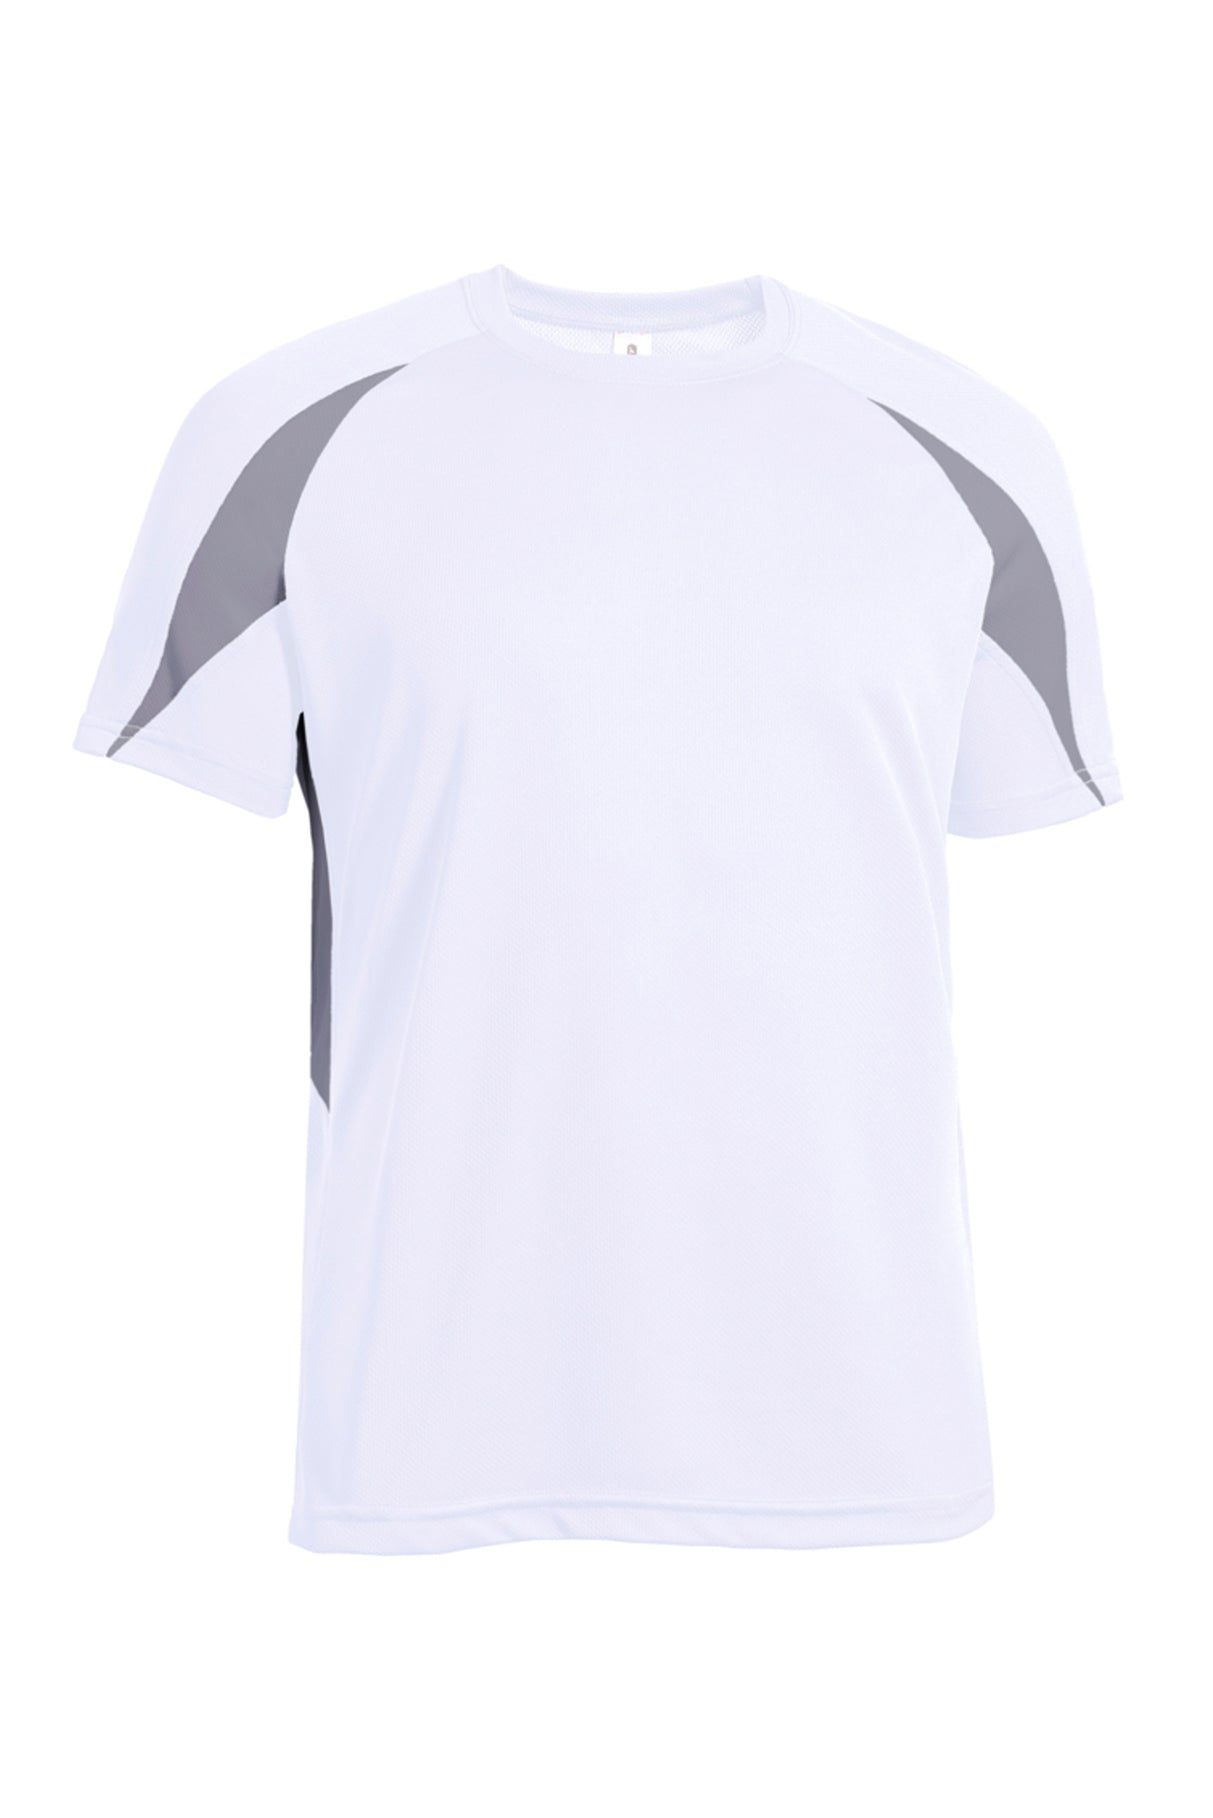 Expert Apparel Men's Oxymesh™ Crossroad Colorblock Tee in Steel White#color_white-steel